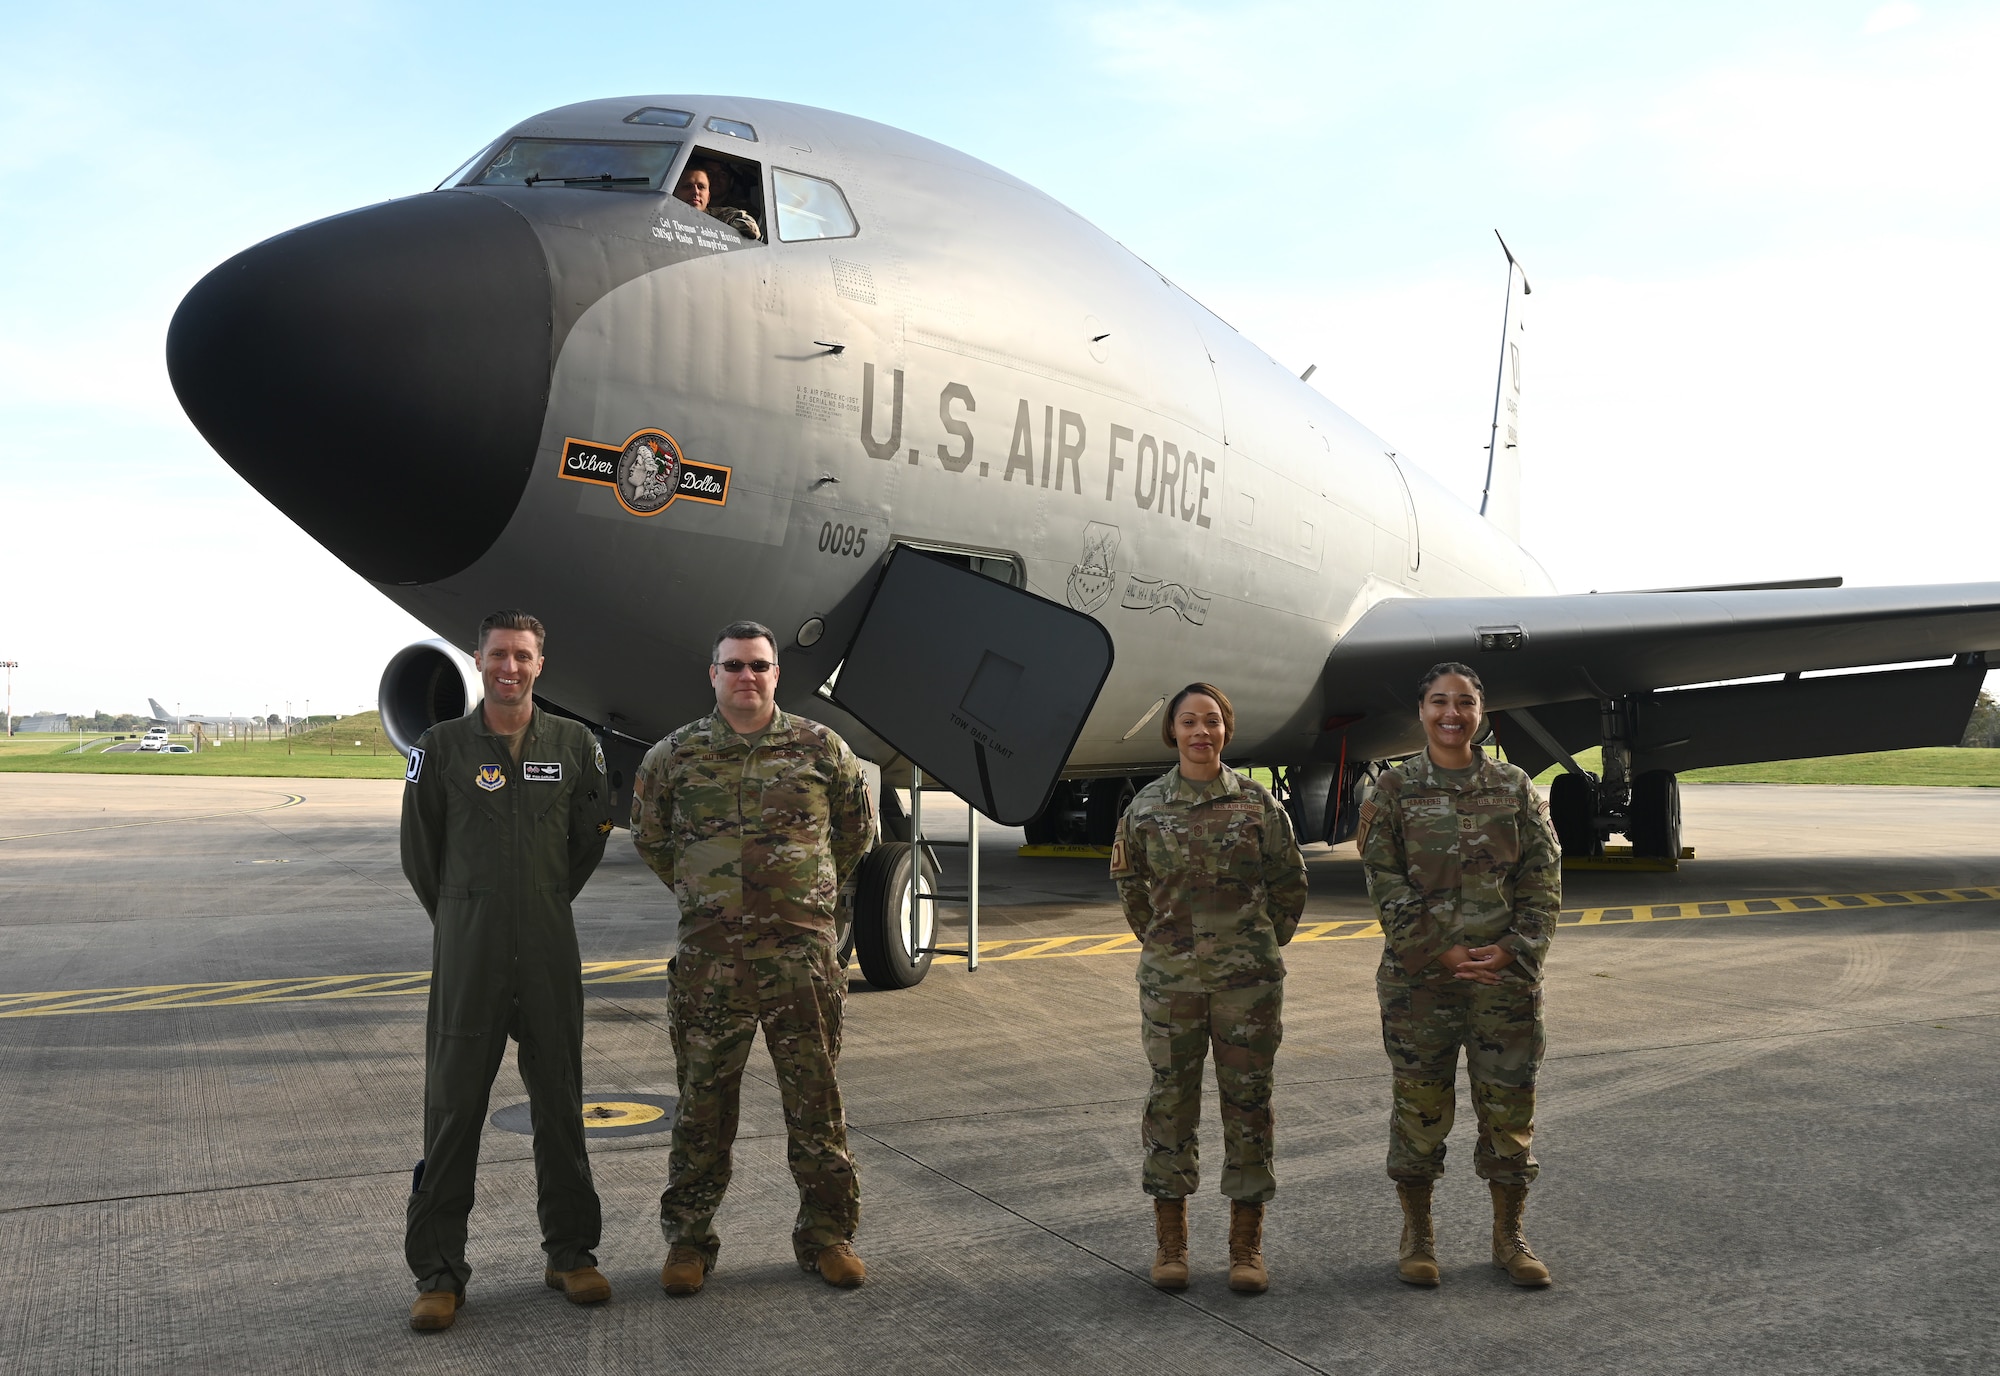 U.S. Air Force Col. Ryan Garlow, left, 100th Air Refueling Wing commander; Col. Thomas Hutton, second left, 100th Operations Group commander; Chief Master Sgt. Tiffany Griego, second right, 100th ARW command chief, and Chief Master Sgt. Wakisha Humphries, right, 100th Operations Group senior enlisted leader, show off the latest heritage nose art – “Silver Dollar” – on a KC-135 Stratotanker after a dedication ceremony at Royal Air Force Mildenhall, England, Oct. 10, 2023. Each of the 100th ARW’s tankers bears a heritage nose art, based on those painted on the side of B-17 Flying Fortress aircraft at the 100th Bomb Group during World War II, and “Silver Dollar” is the only double-sided design in the fleet. (U.S. Air Force photo by Karen Abeyasekere)